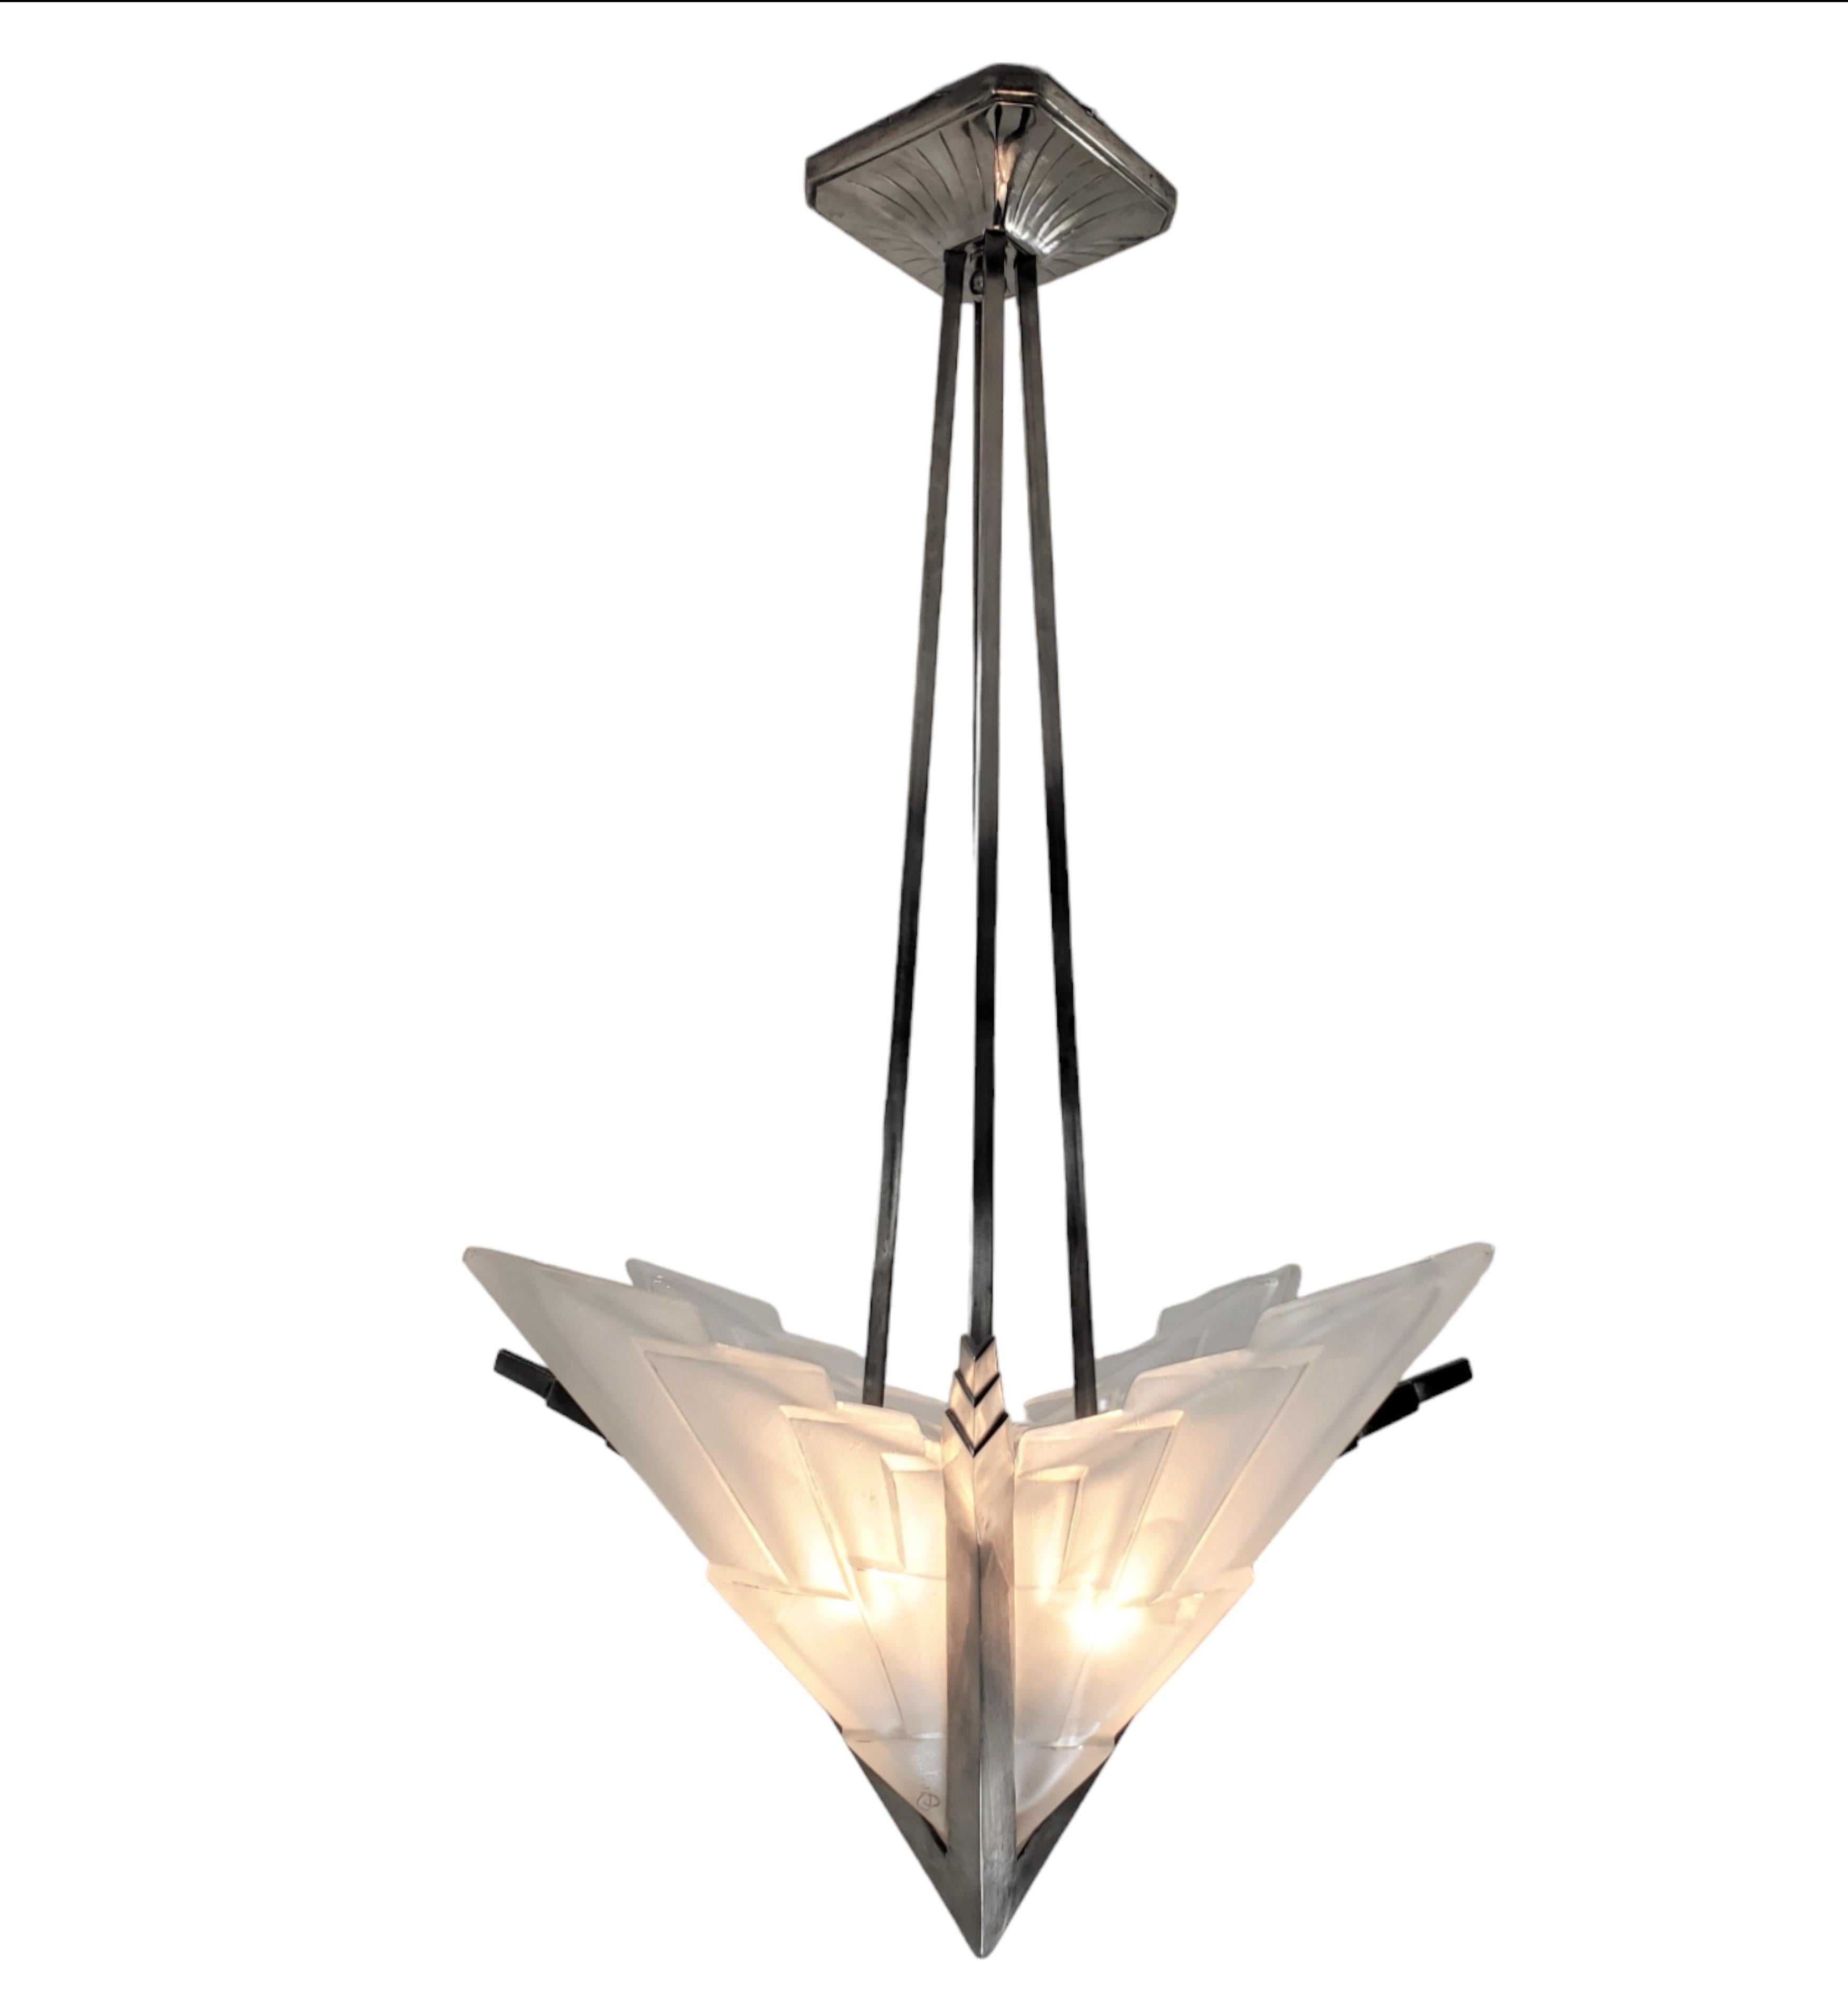 Original French Art Deco Angular Art Glass Chandelier in Nickel Bronze by Degue In Good Condition For Sale In New York City, NY